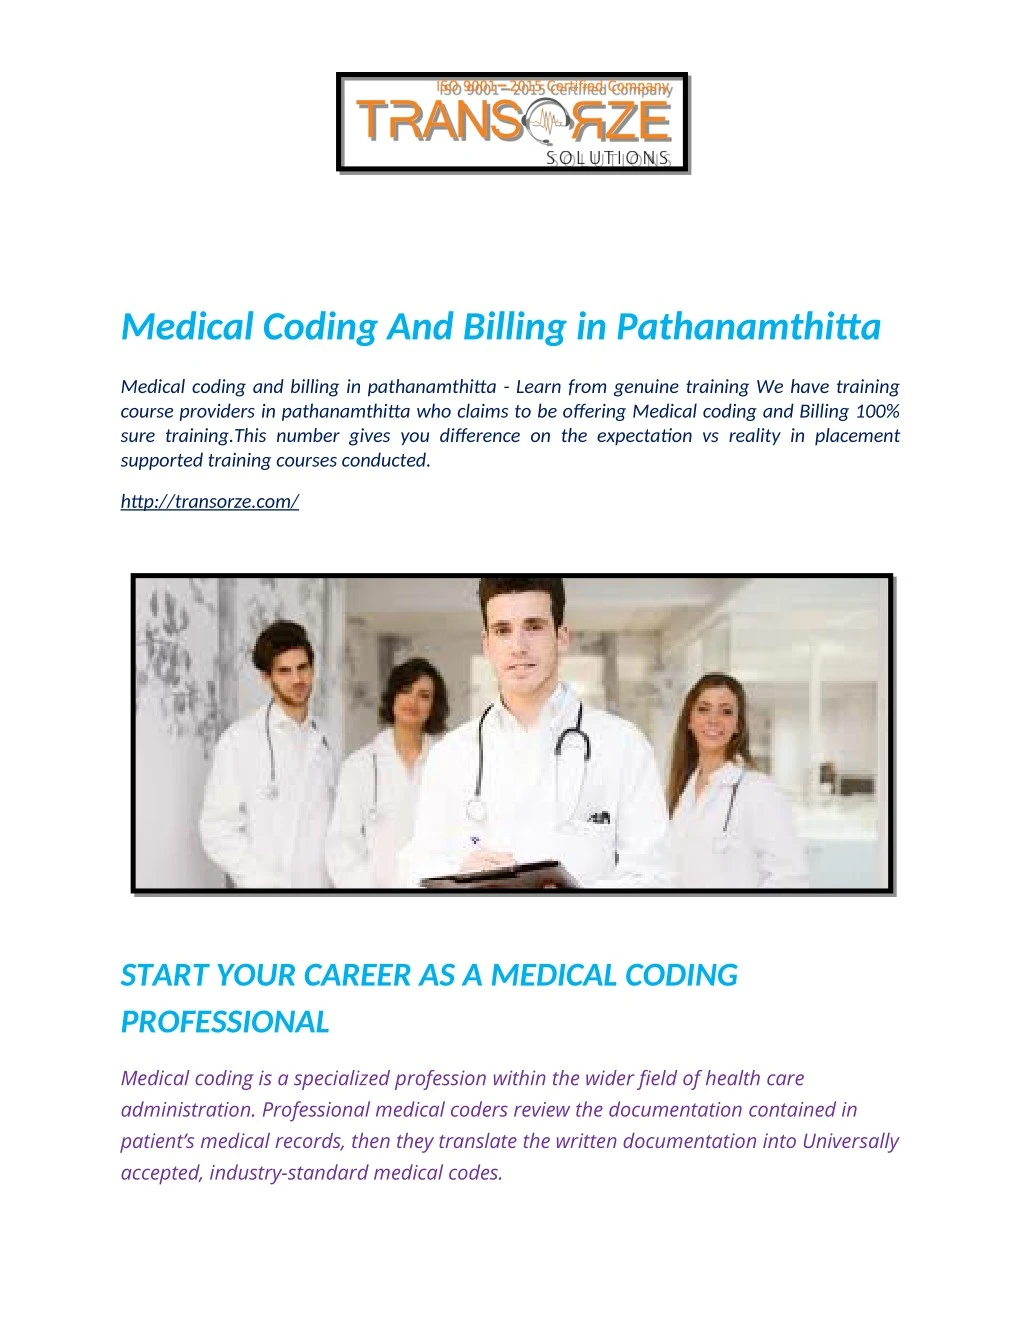 PPT - Medical Coding And Billing in Pathanamthitta ...